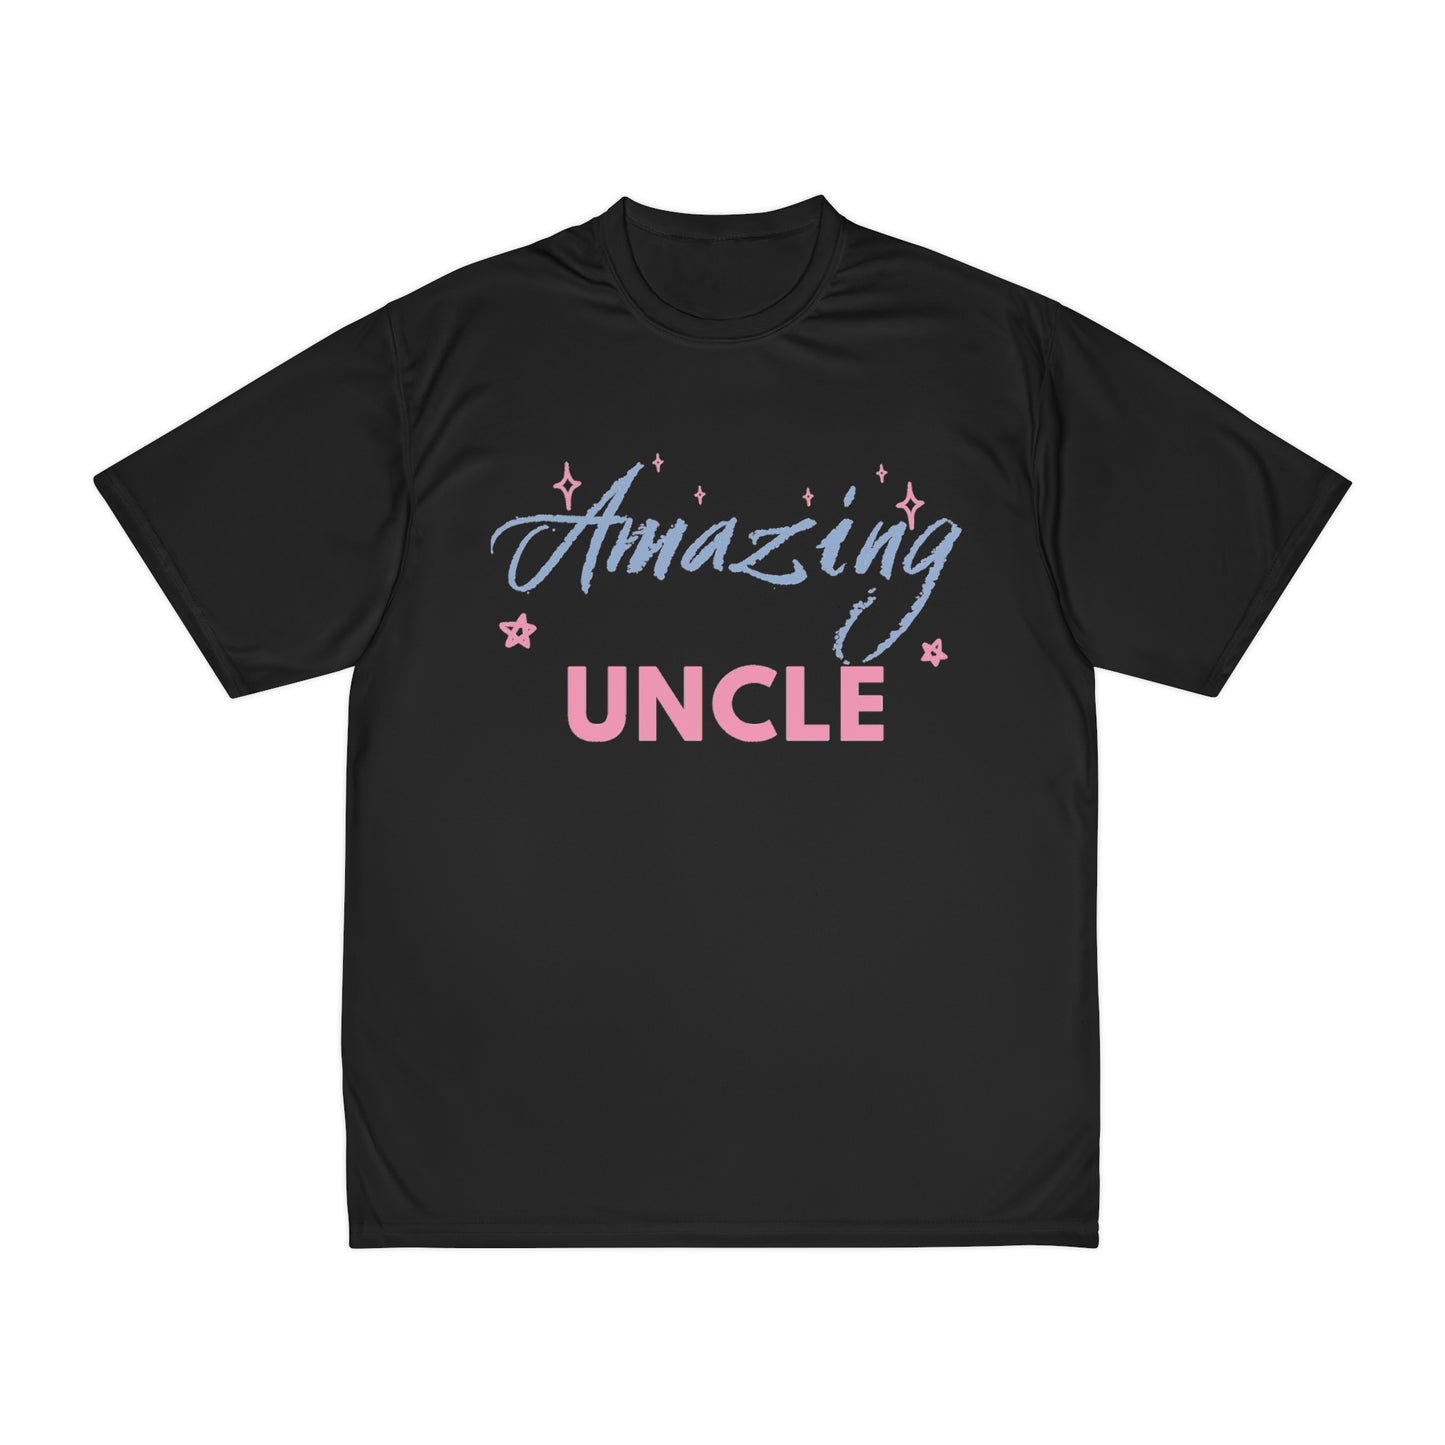 Amazing Uncle Performance T-shirt, Men's Active Apparel, Comfortable Workout Tee, Athletic Clothing, Cool Gym Shirt